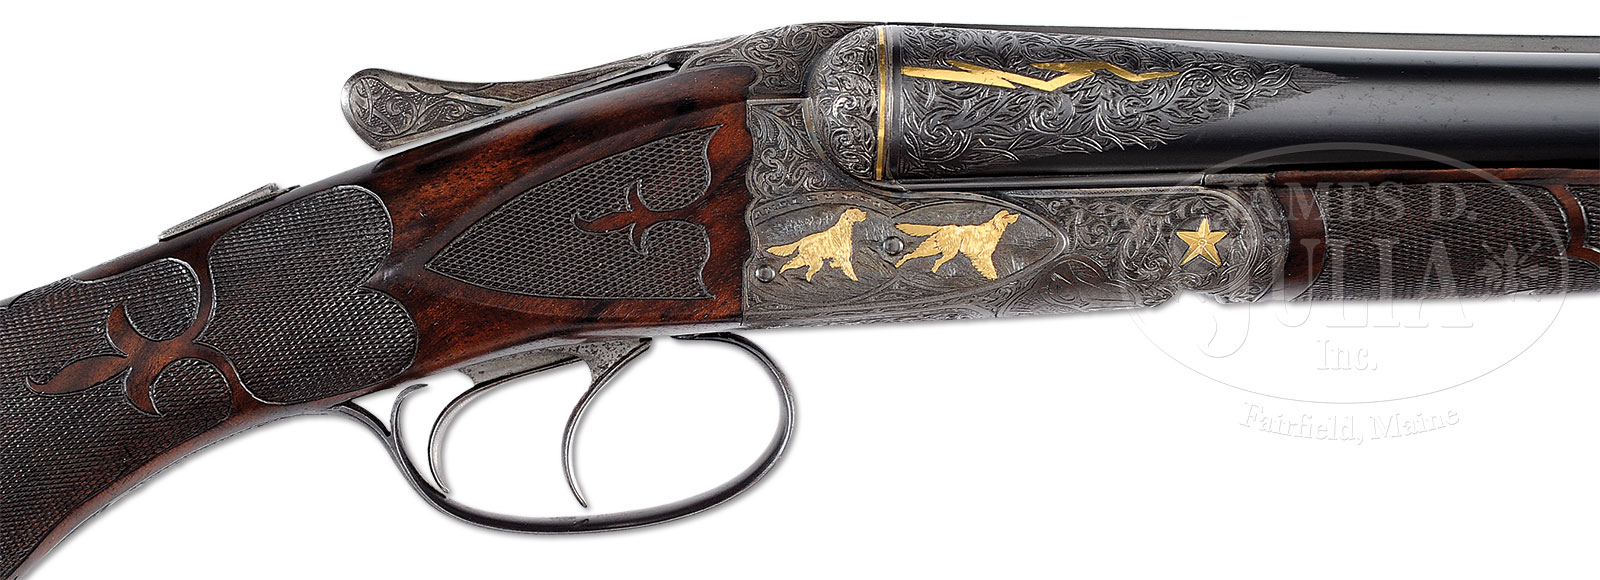 EXCEPTIONALLY RARE (ONE OF THREE) AND EXTREMELY FINE 20 BORE A. H. FOX “FE” SHOTGUN WITH SPECIAL GOLD INLAYS WITH CALLAHAN LETTER.